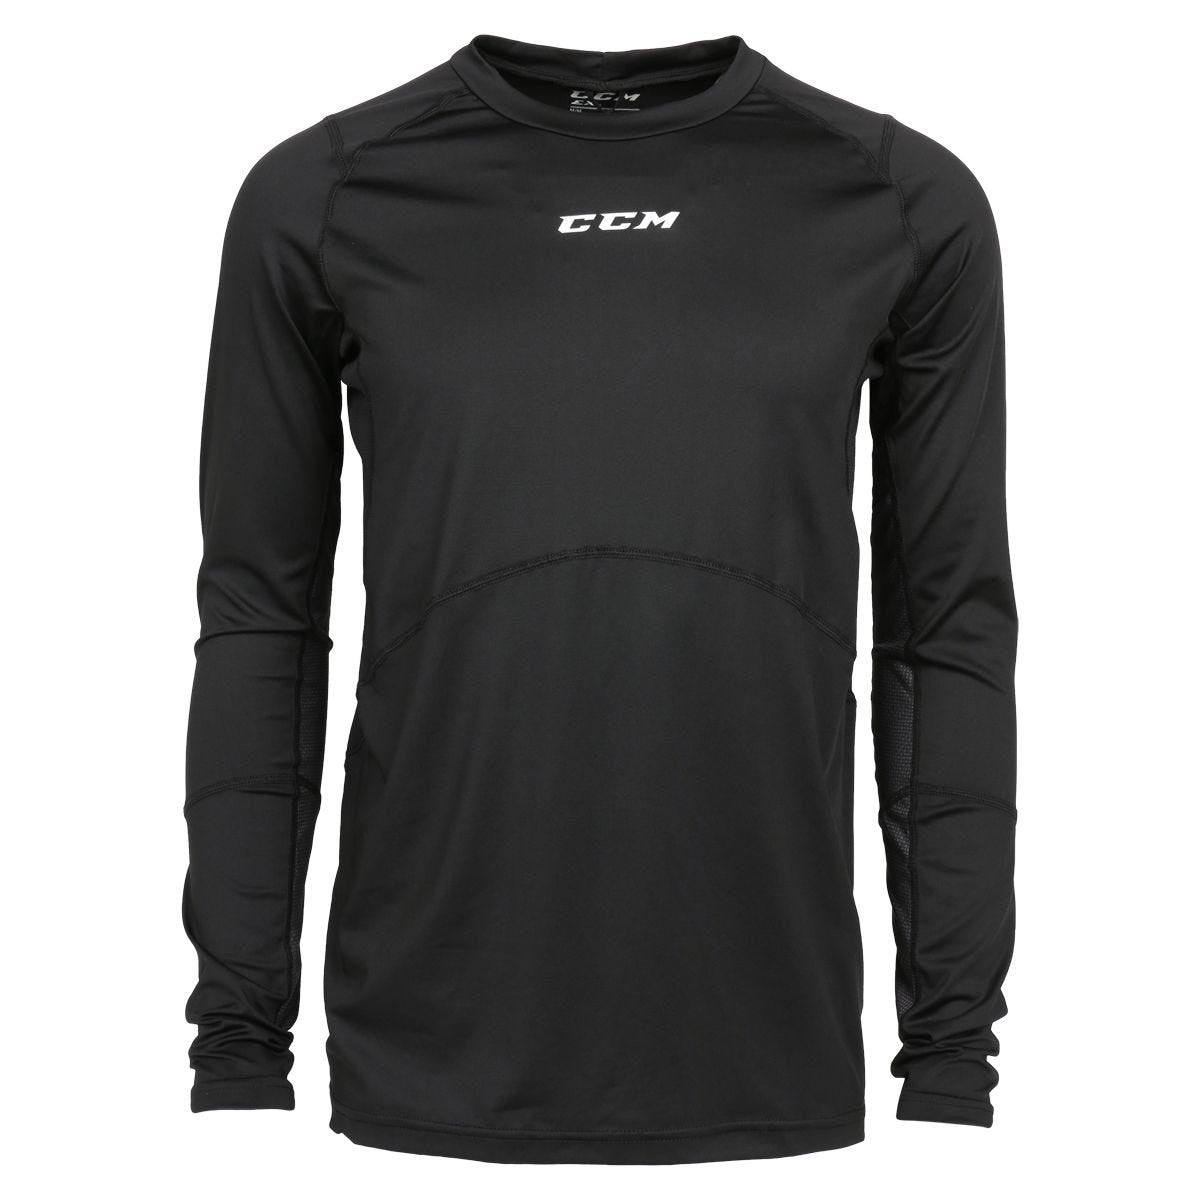 CCM Youth Long Sleeve Compression Top with Grip